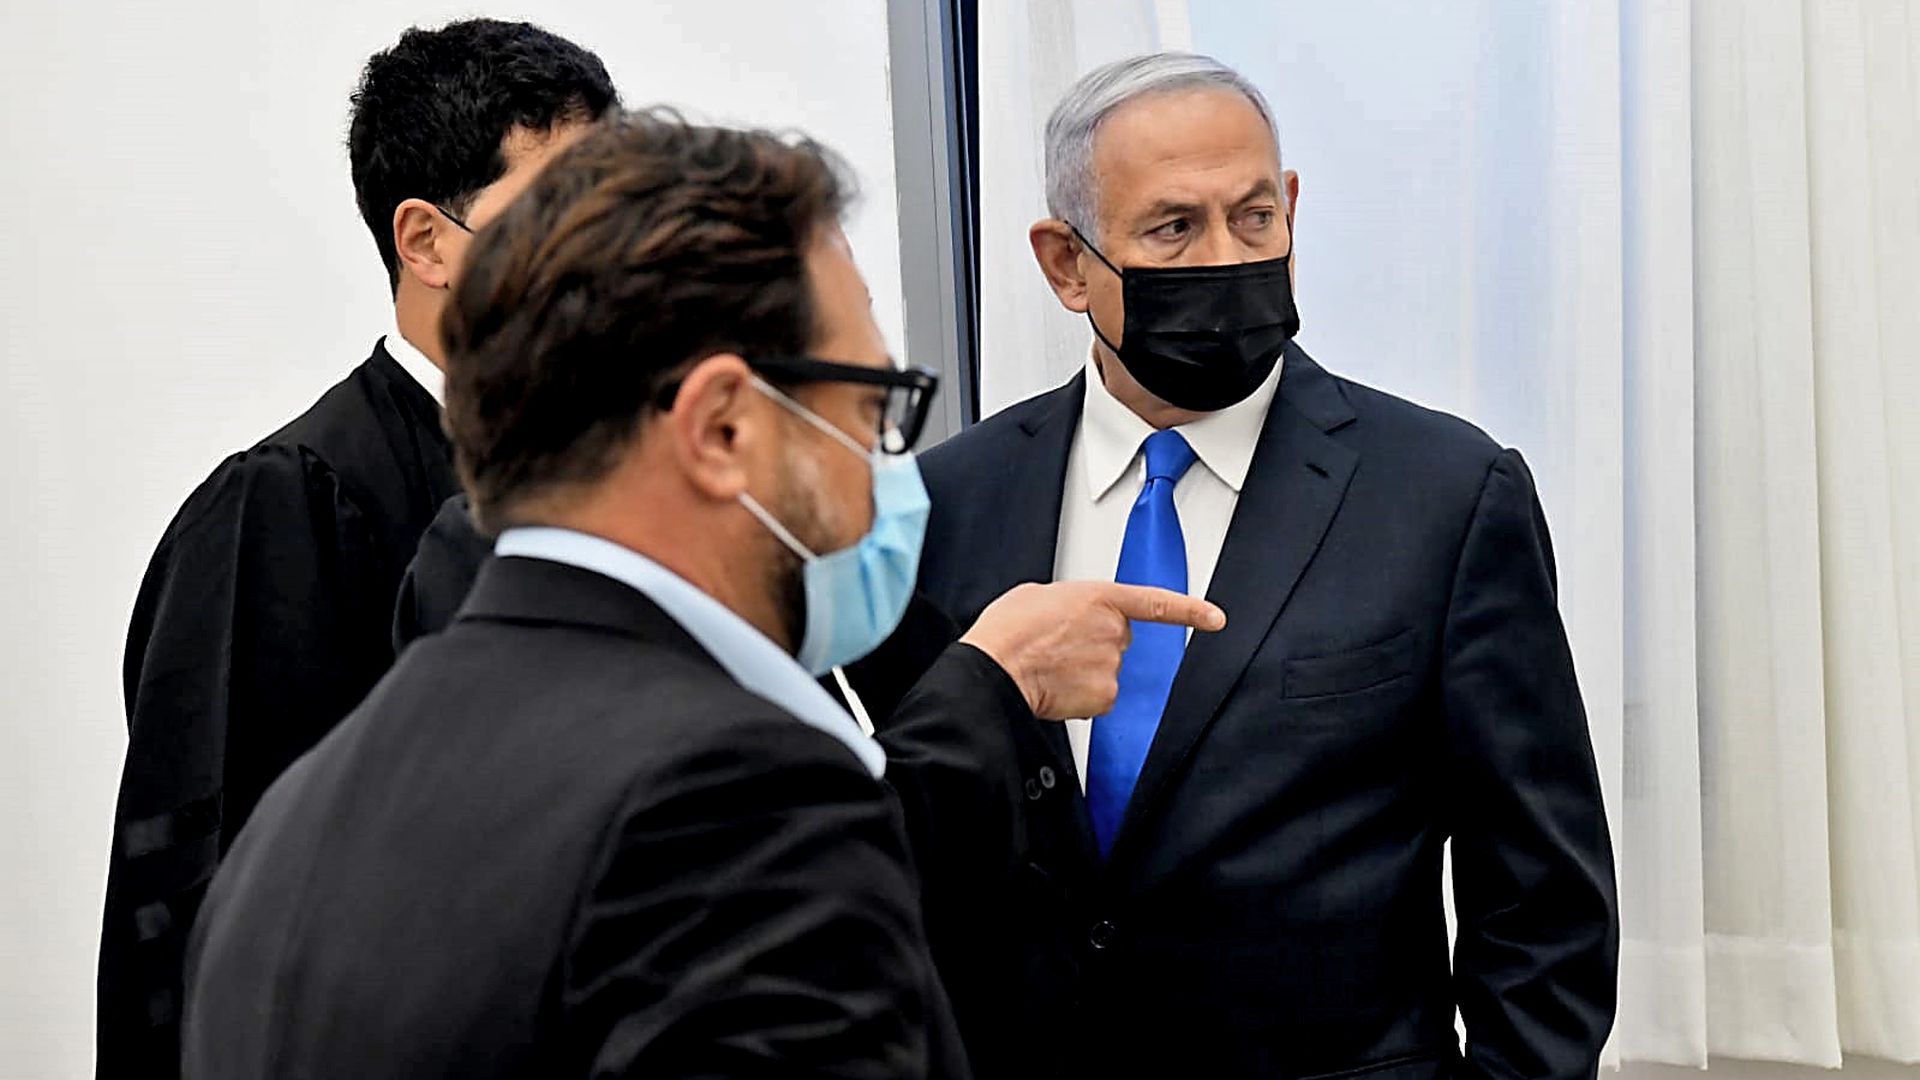 Israeli Prime Minister Benjamin Netanyahu (R) talks to his lawyers ahead of a hearing in his corruption trial at the Jerusalem district court